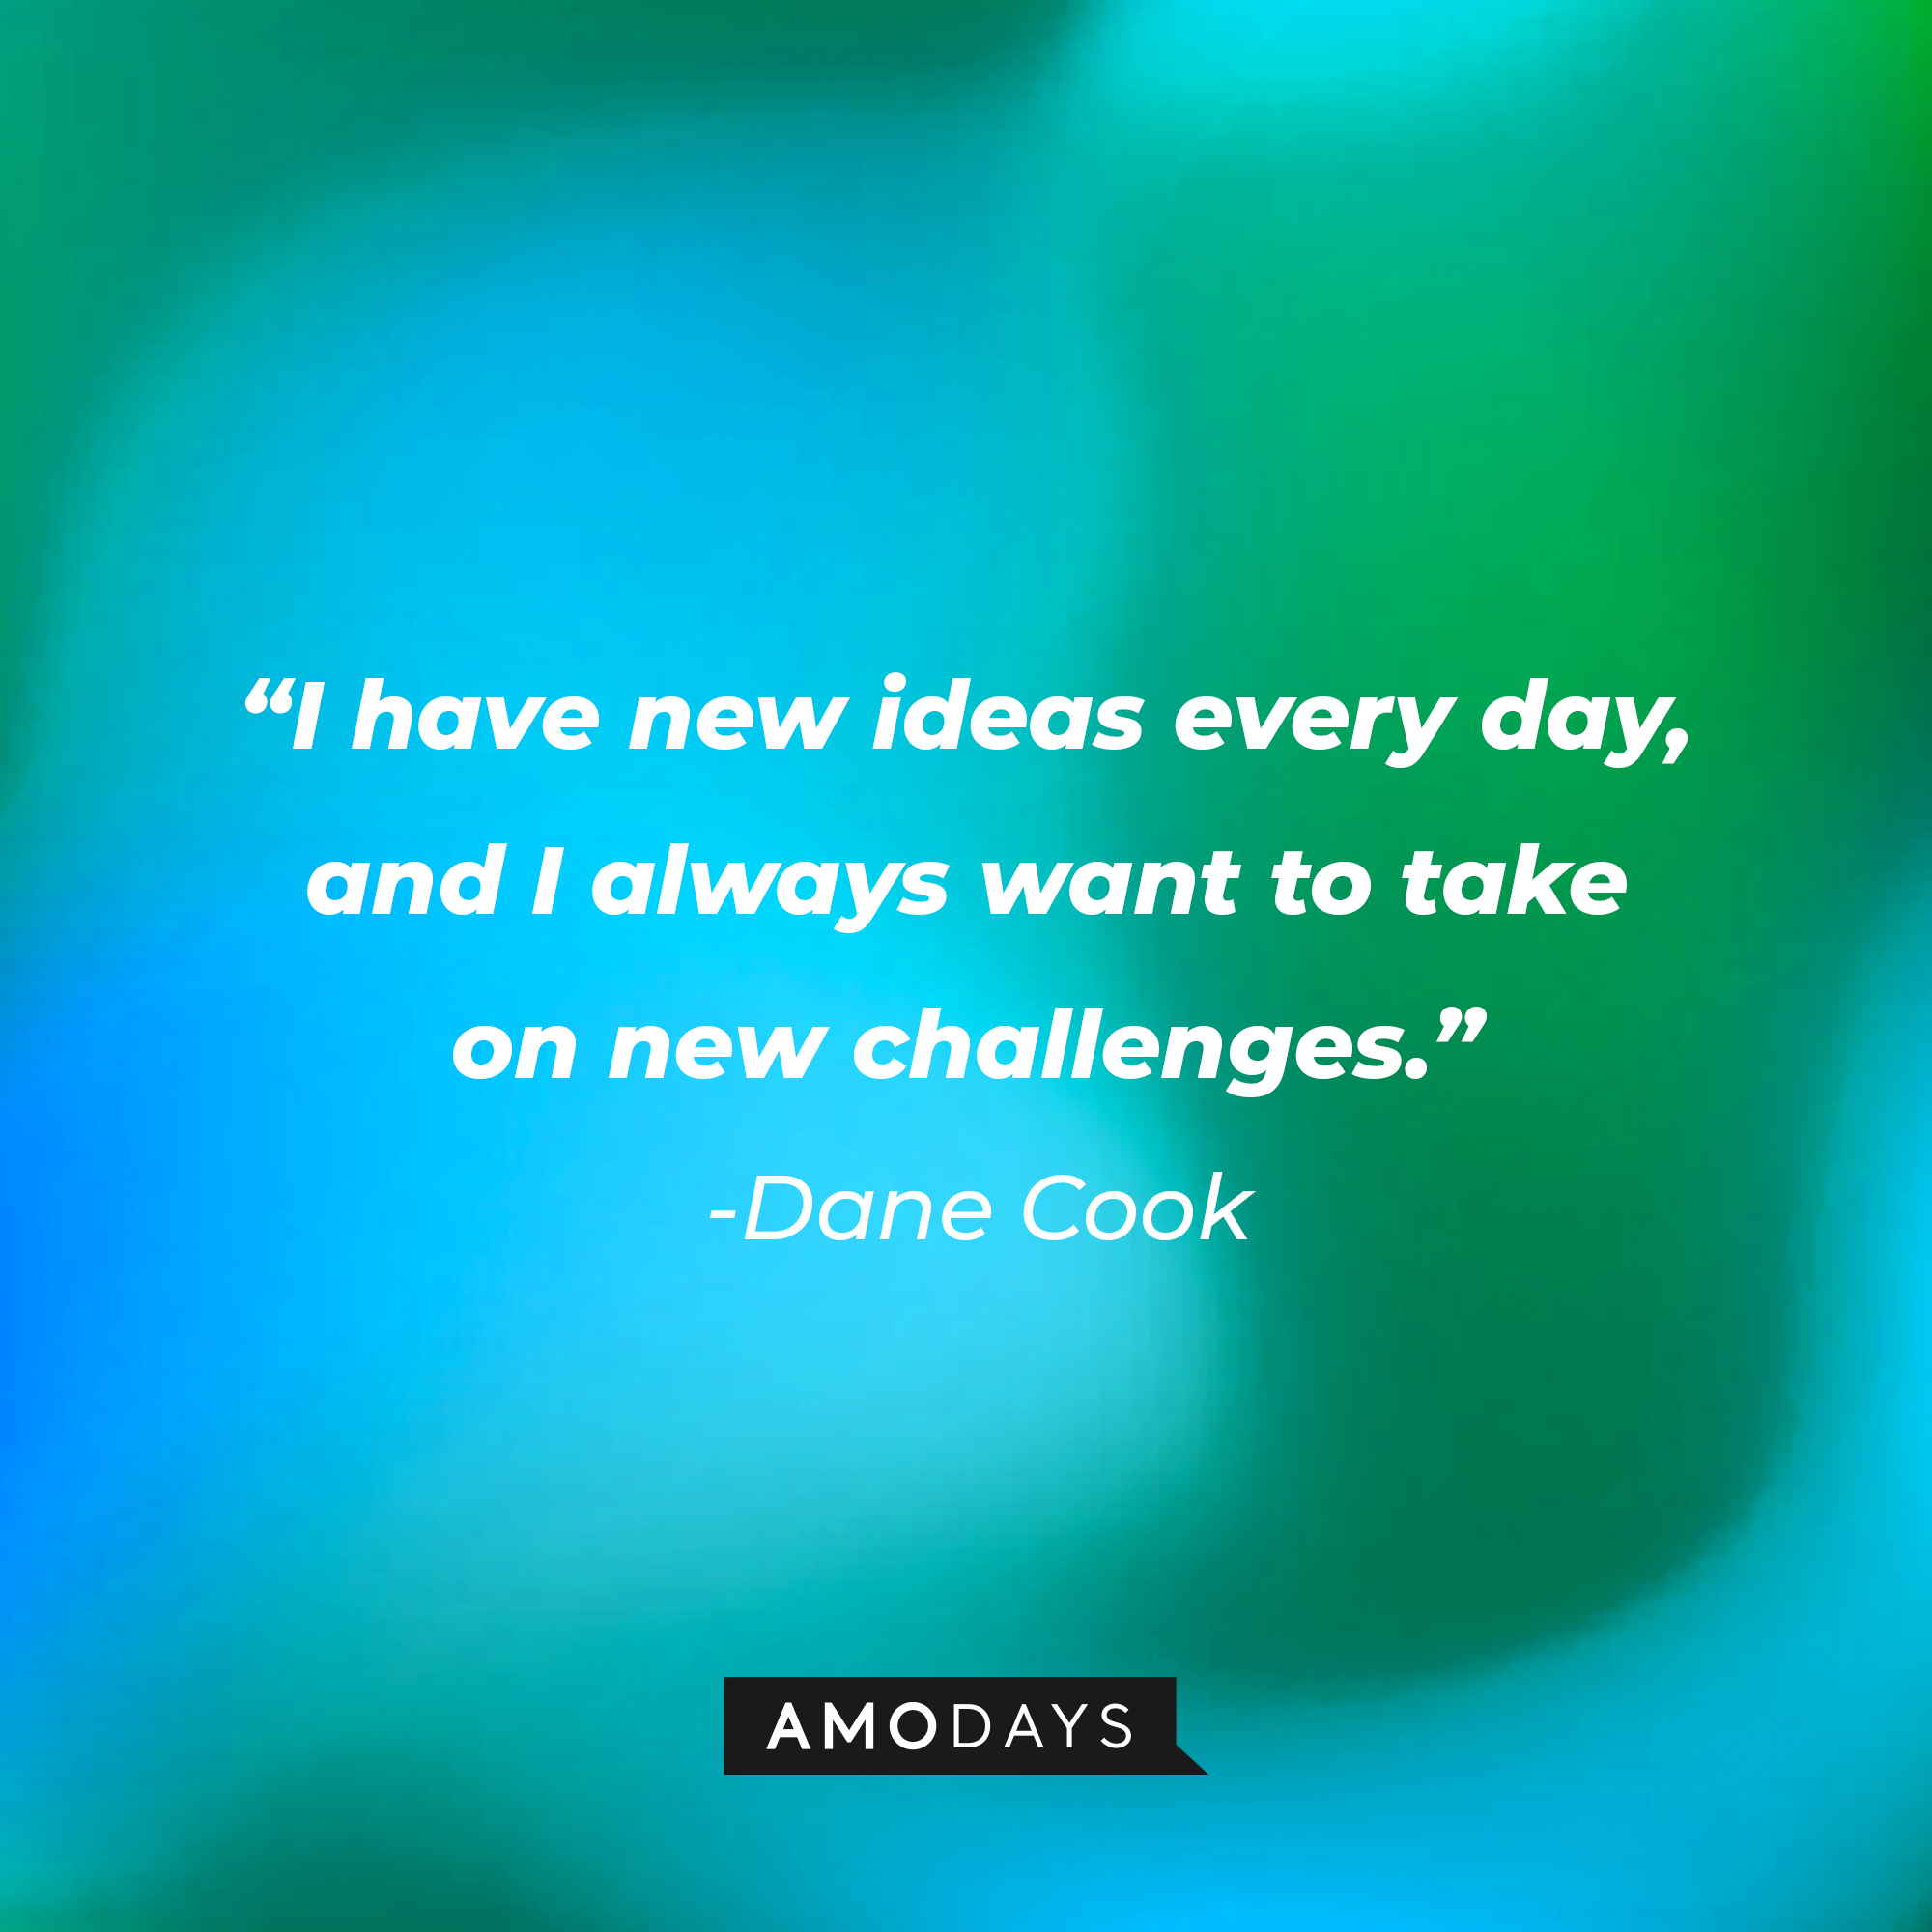 Dane Cook's quote: “I have new ideas every day, and I always want to take on new challenges. | Source: Amodays